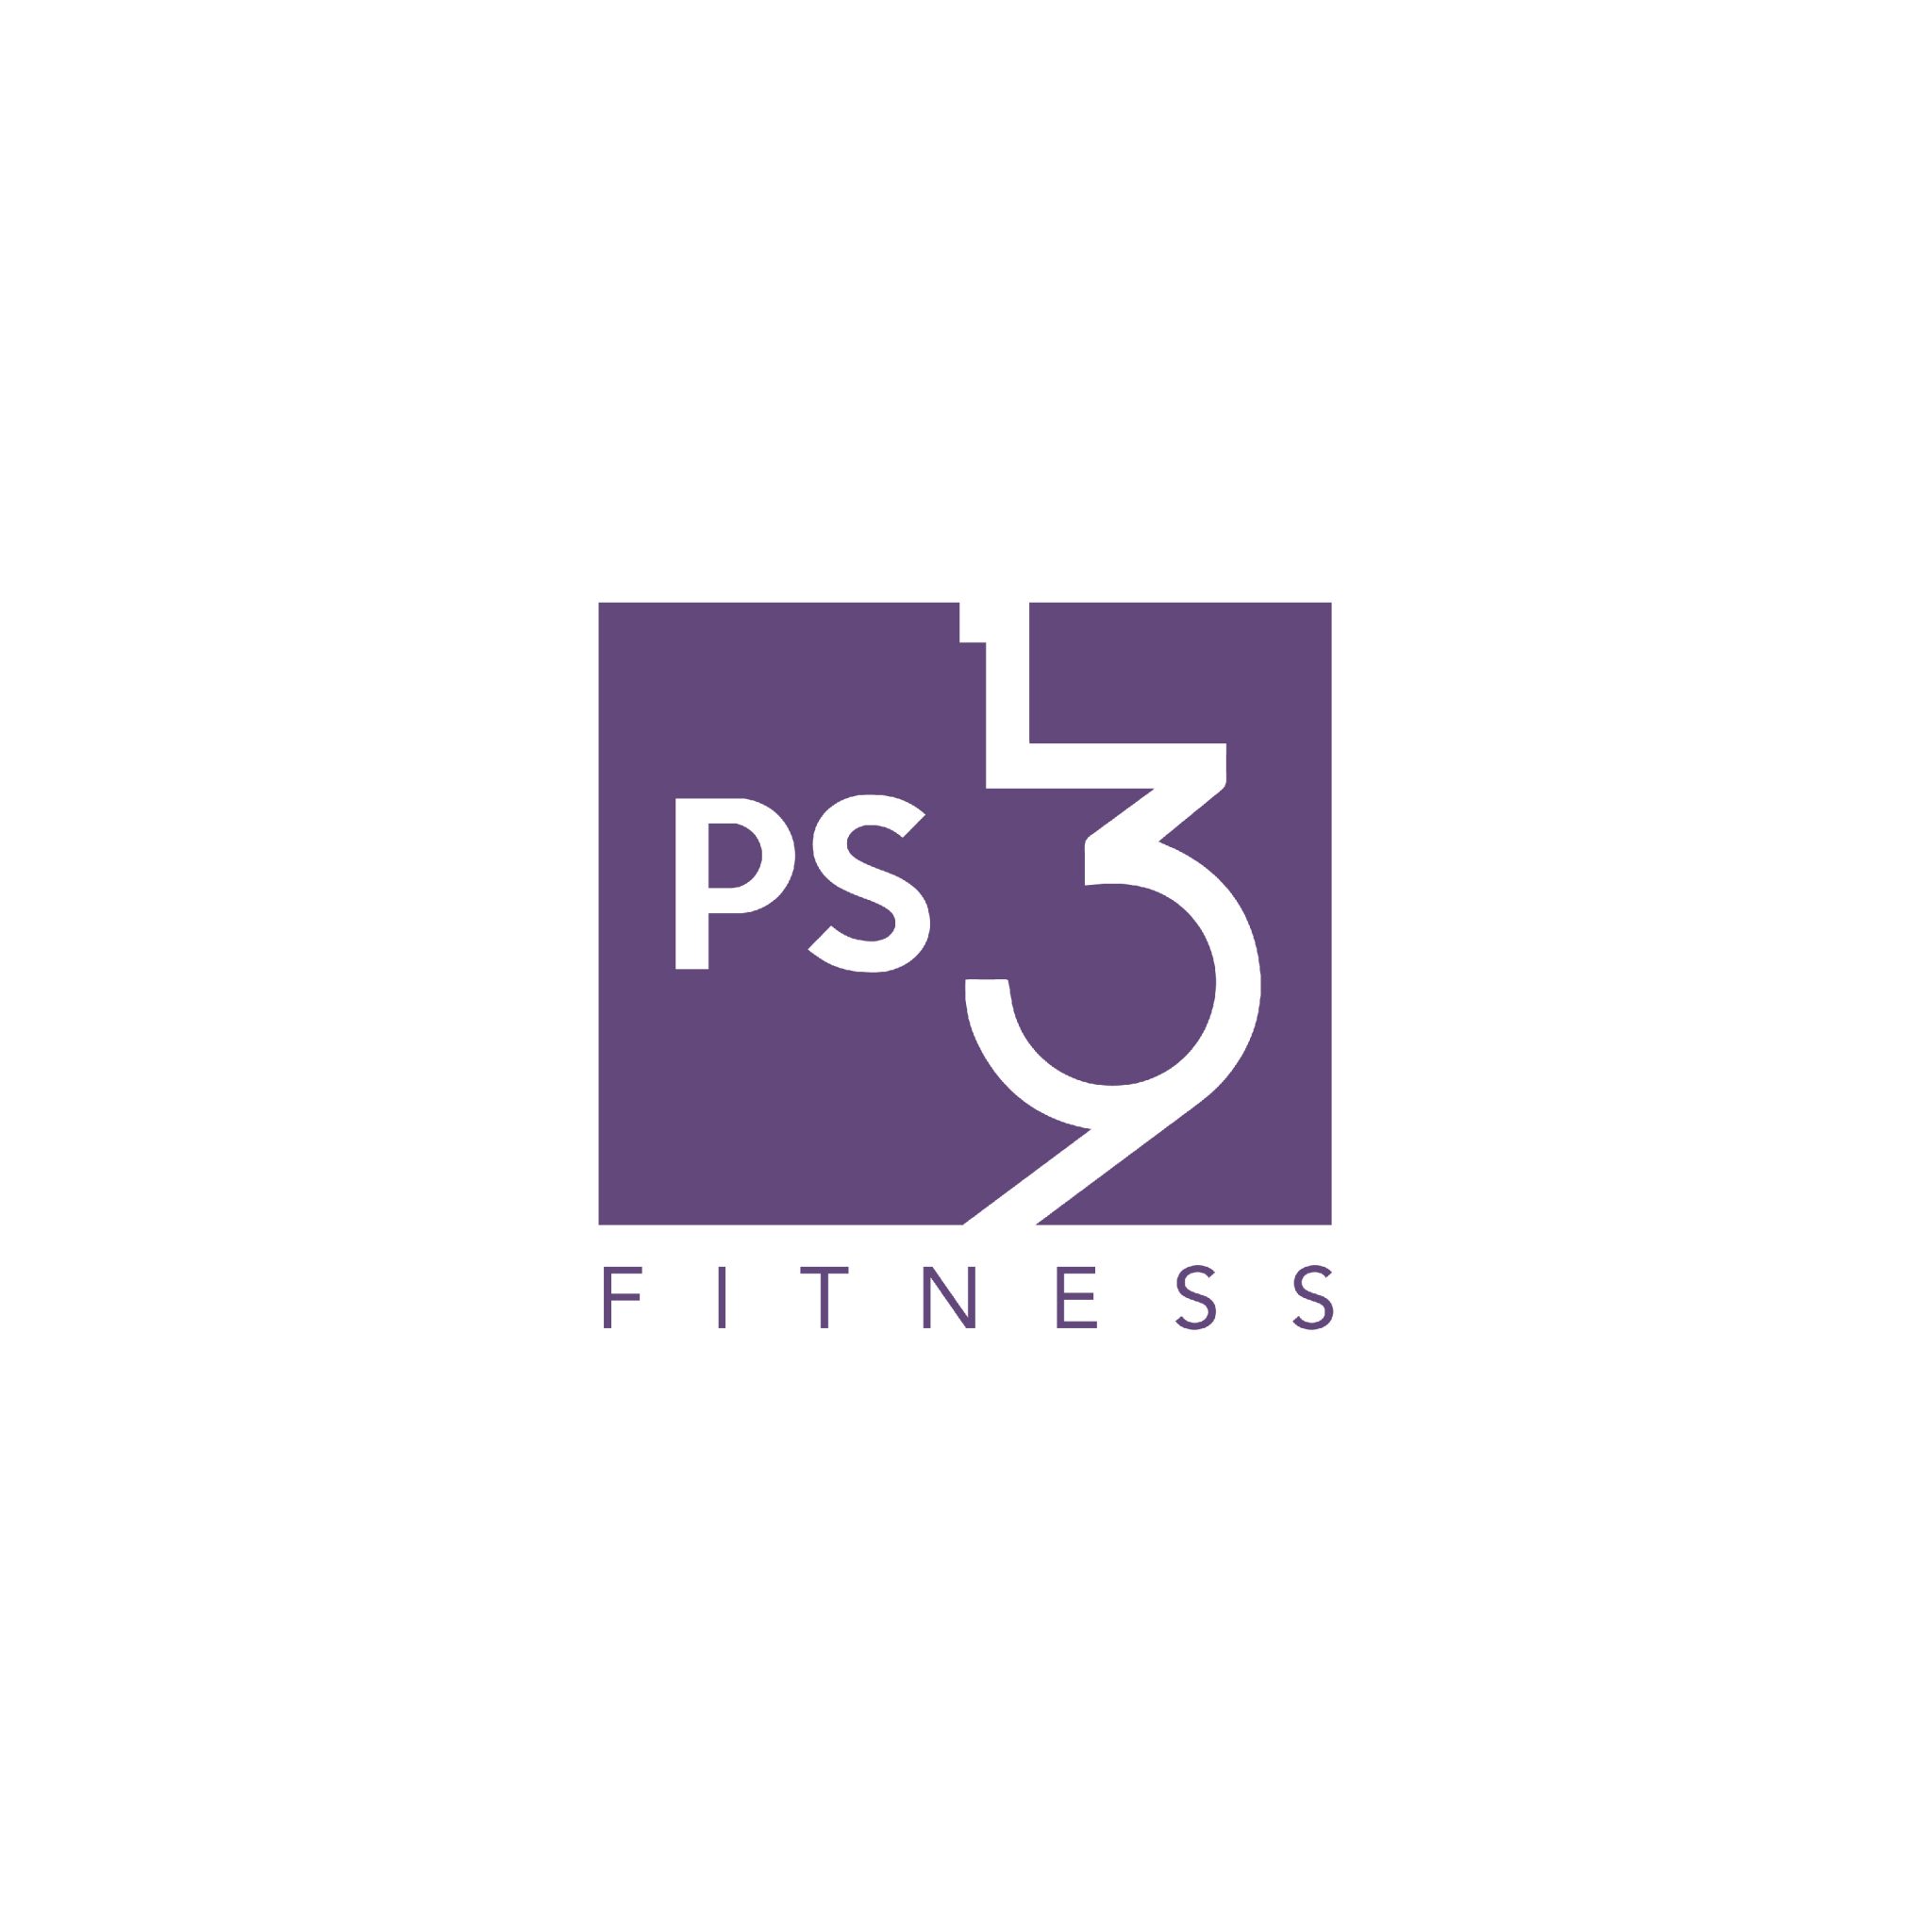 PS 139 Fitness